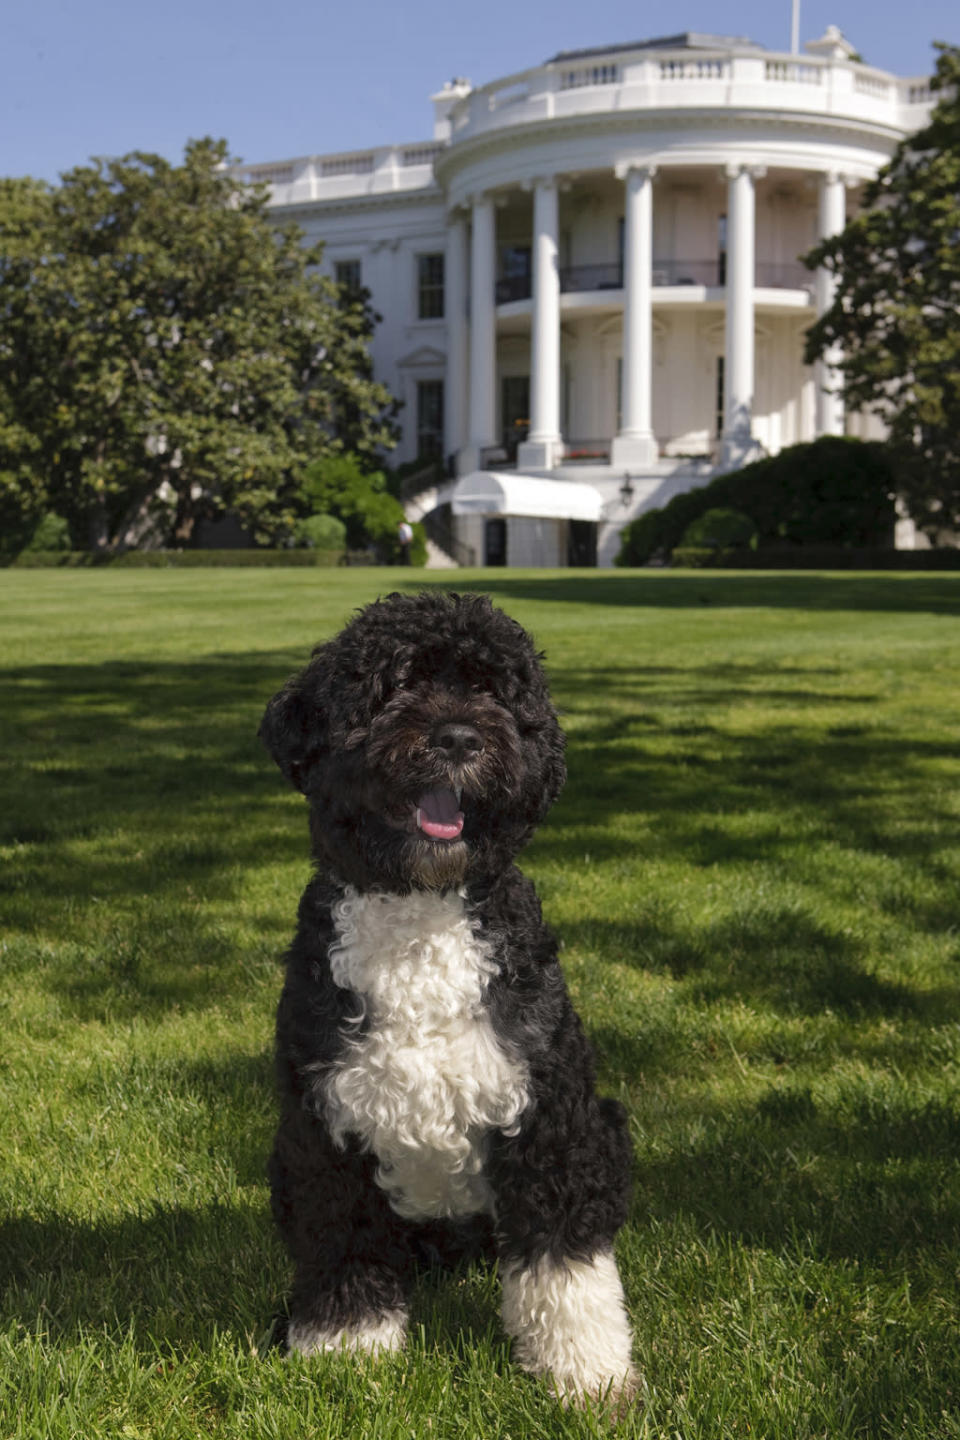 In this handout image provided by The White House, the official portrait of the Obama family dog "Bo", a Portuguese water dog, on the South Lawn of the White House on May 20, 2009 in Washington, DC. (Photo by Chuck Kennedy/The White House via Getty Images)